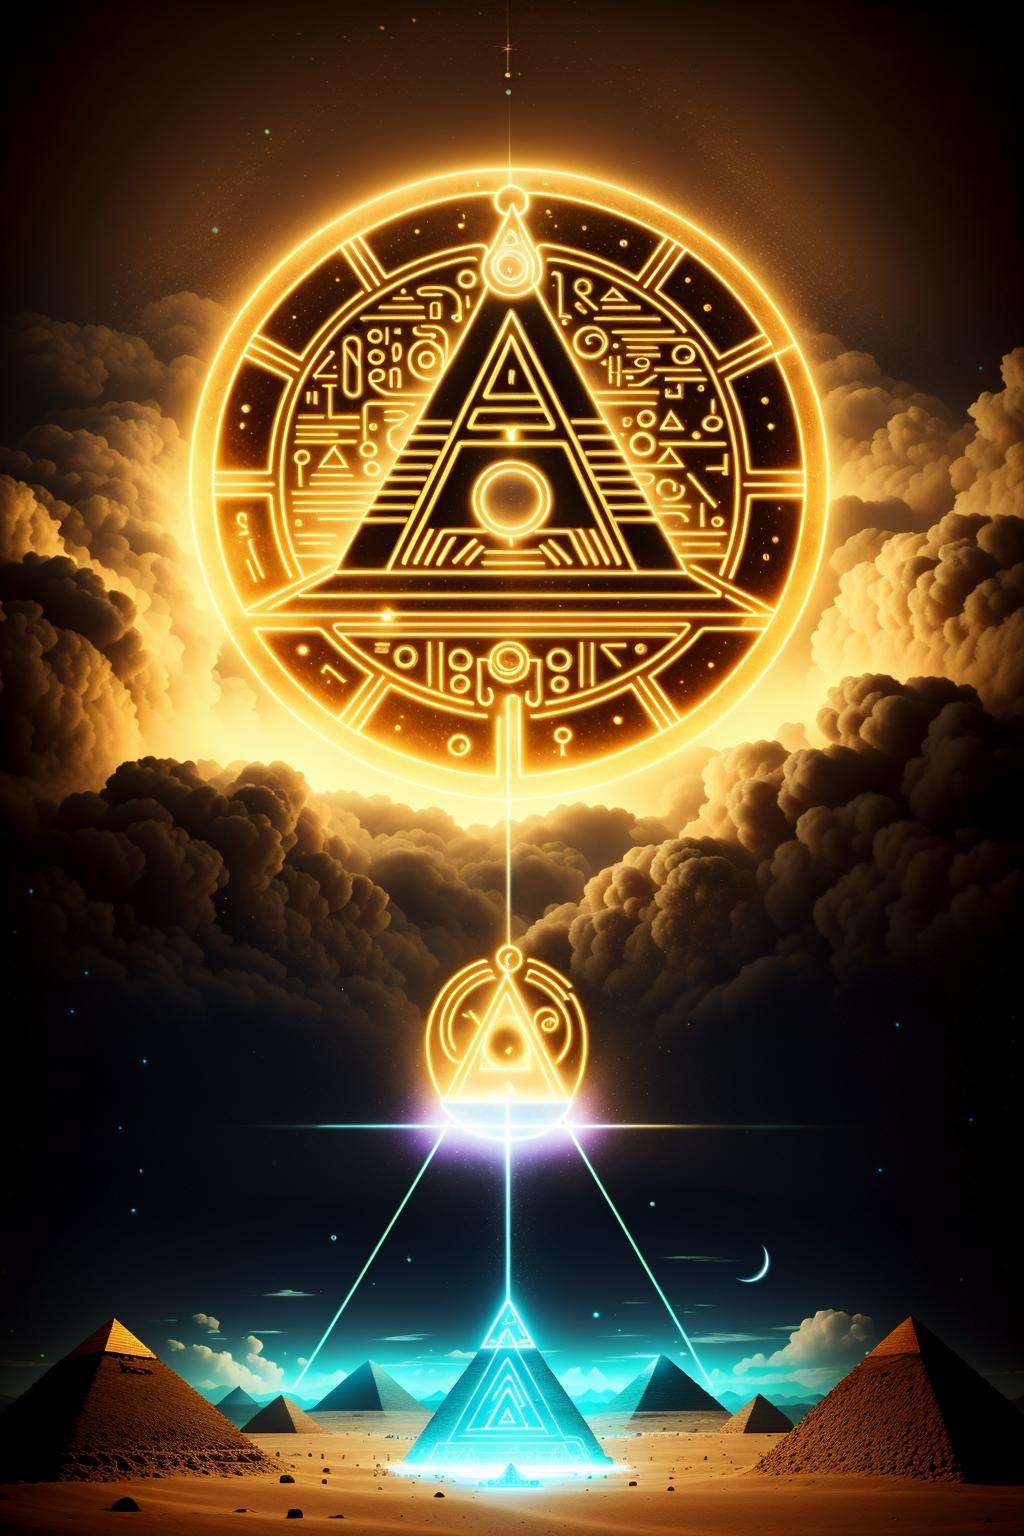 (a masonic symbol with a sun and moon) ,  Cyber_Egypt , cyberpunk ,  Professional photography, pastel  colors , Occult art,  occultism, surreal art, Occult, reflective materials , artistic photography, new age, illuminati, gnosticism, minimalism, Occult, sacred, 3d render